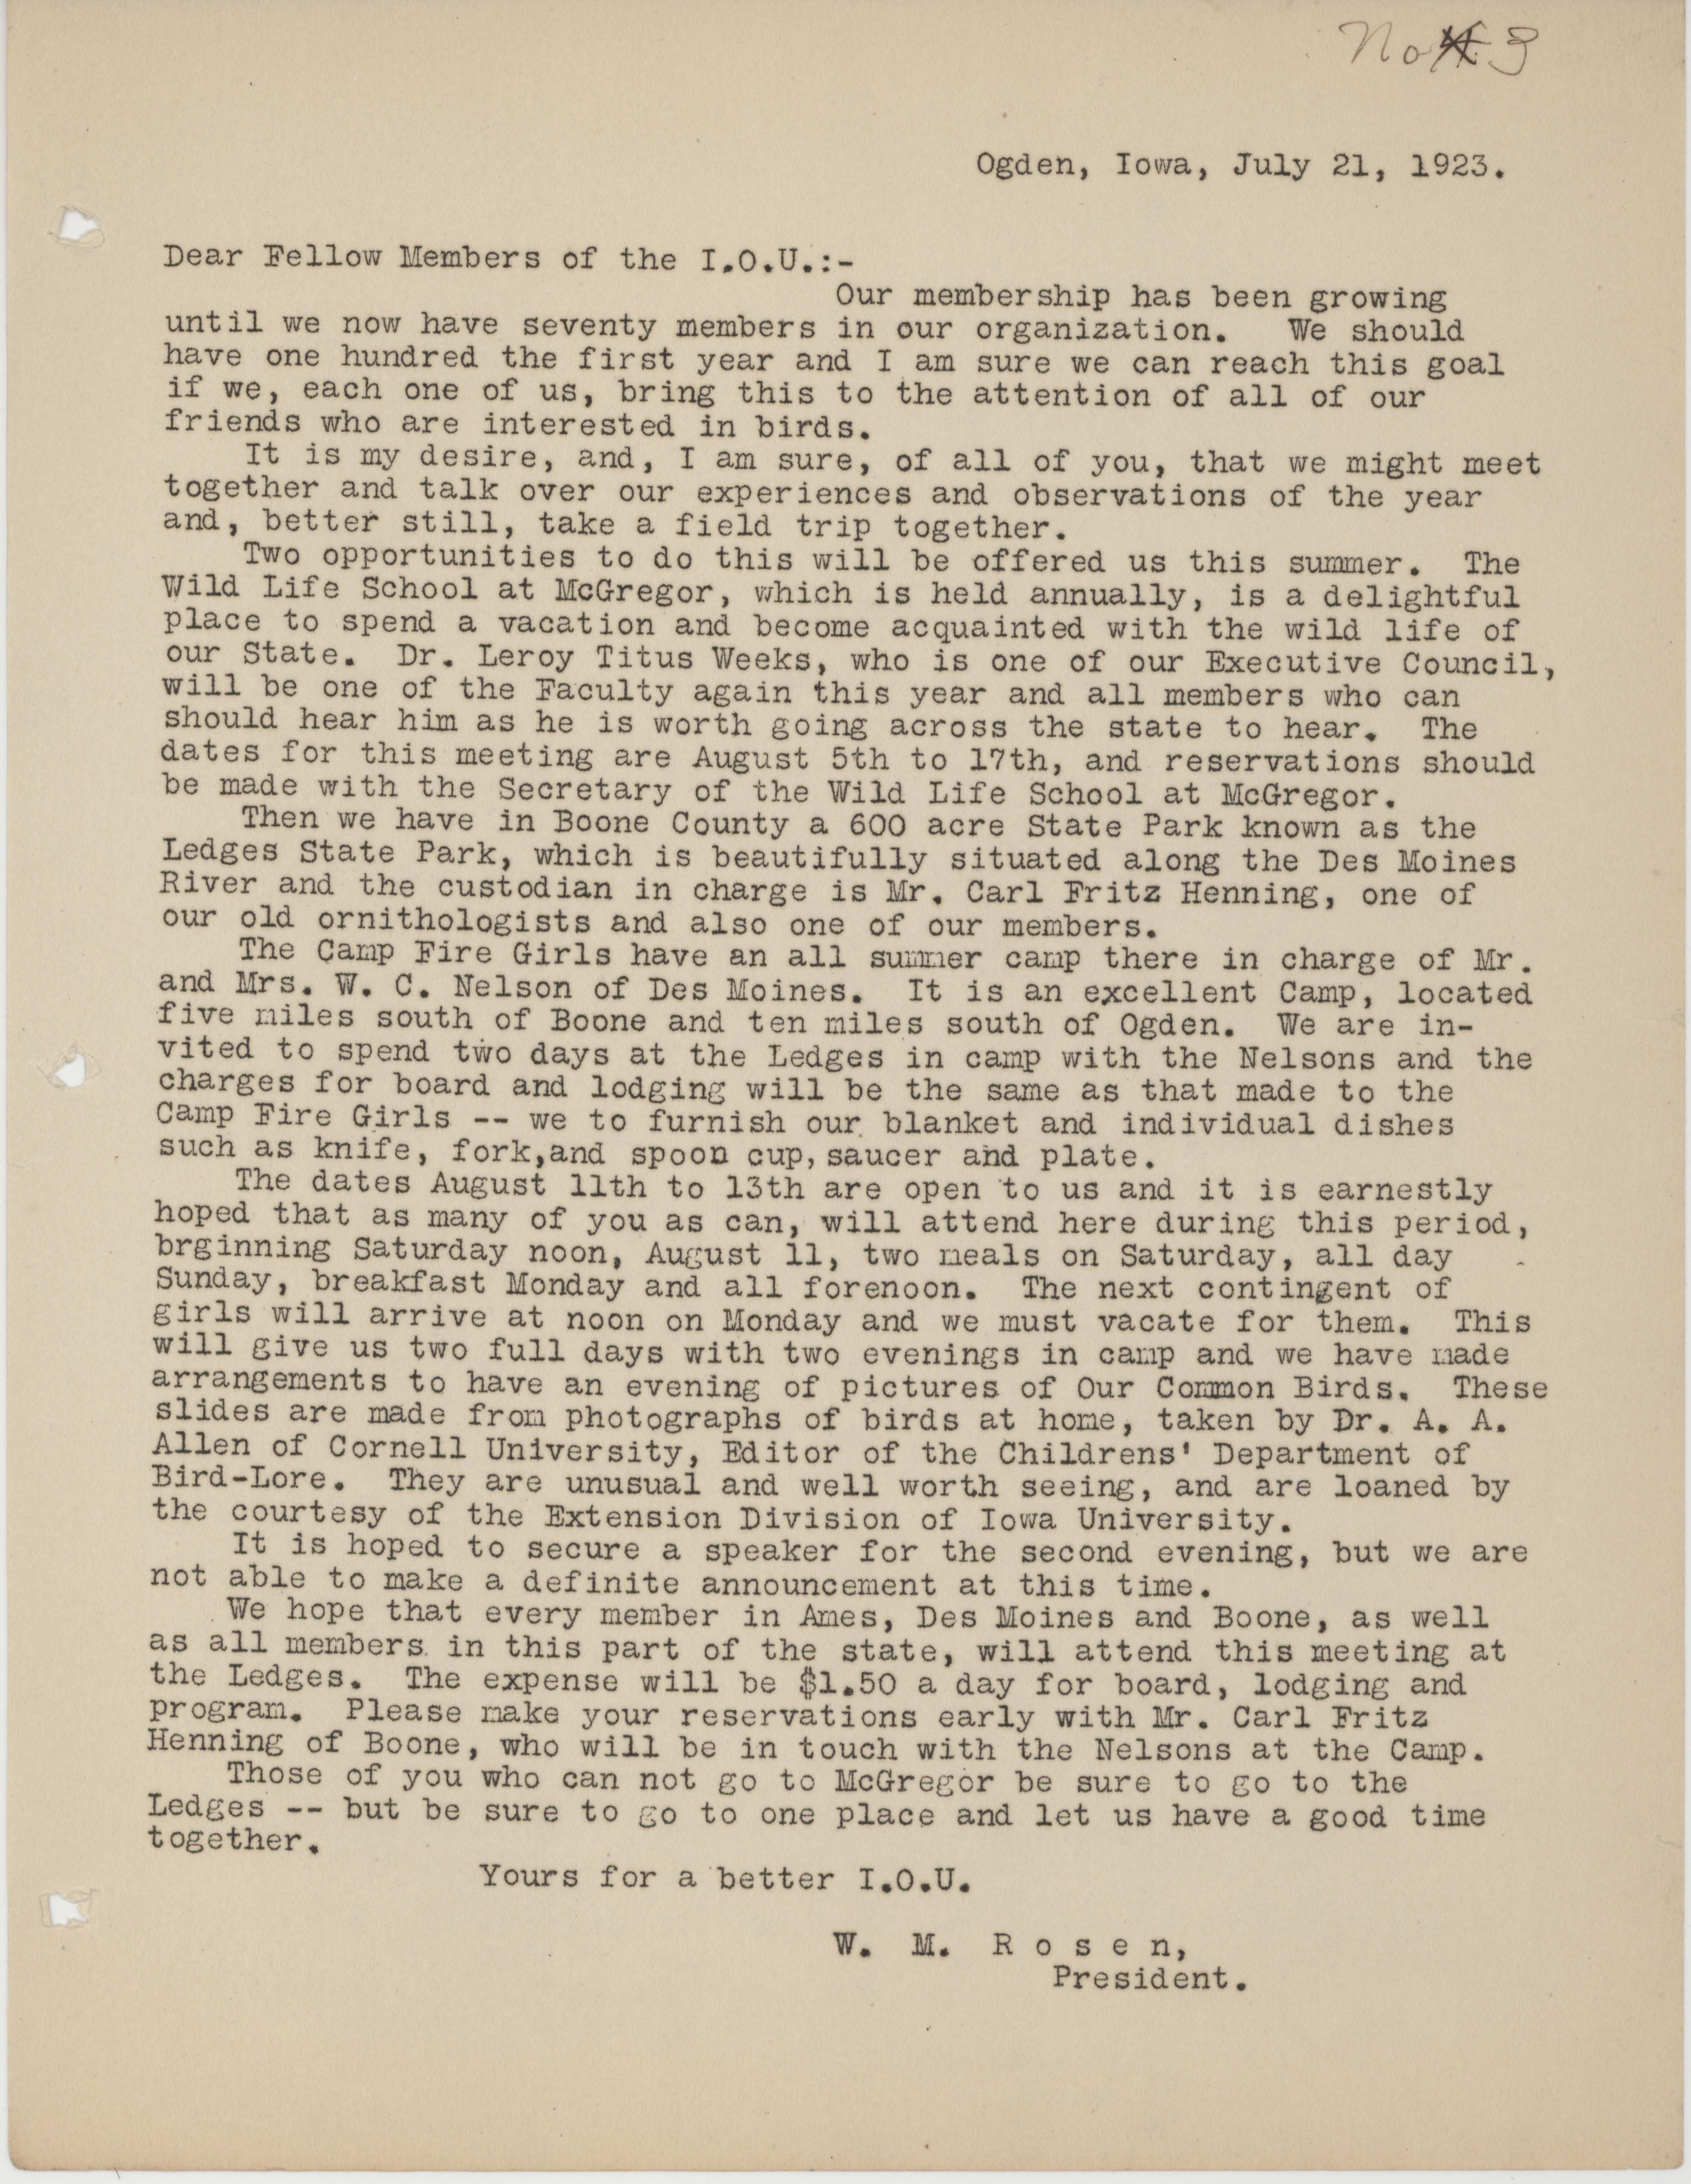 Letter to members of the Iowa Ornithologists' Union regarding a field trip, July 21, 1923 